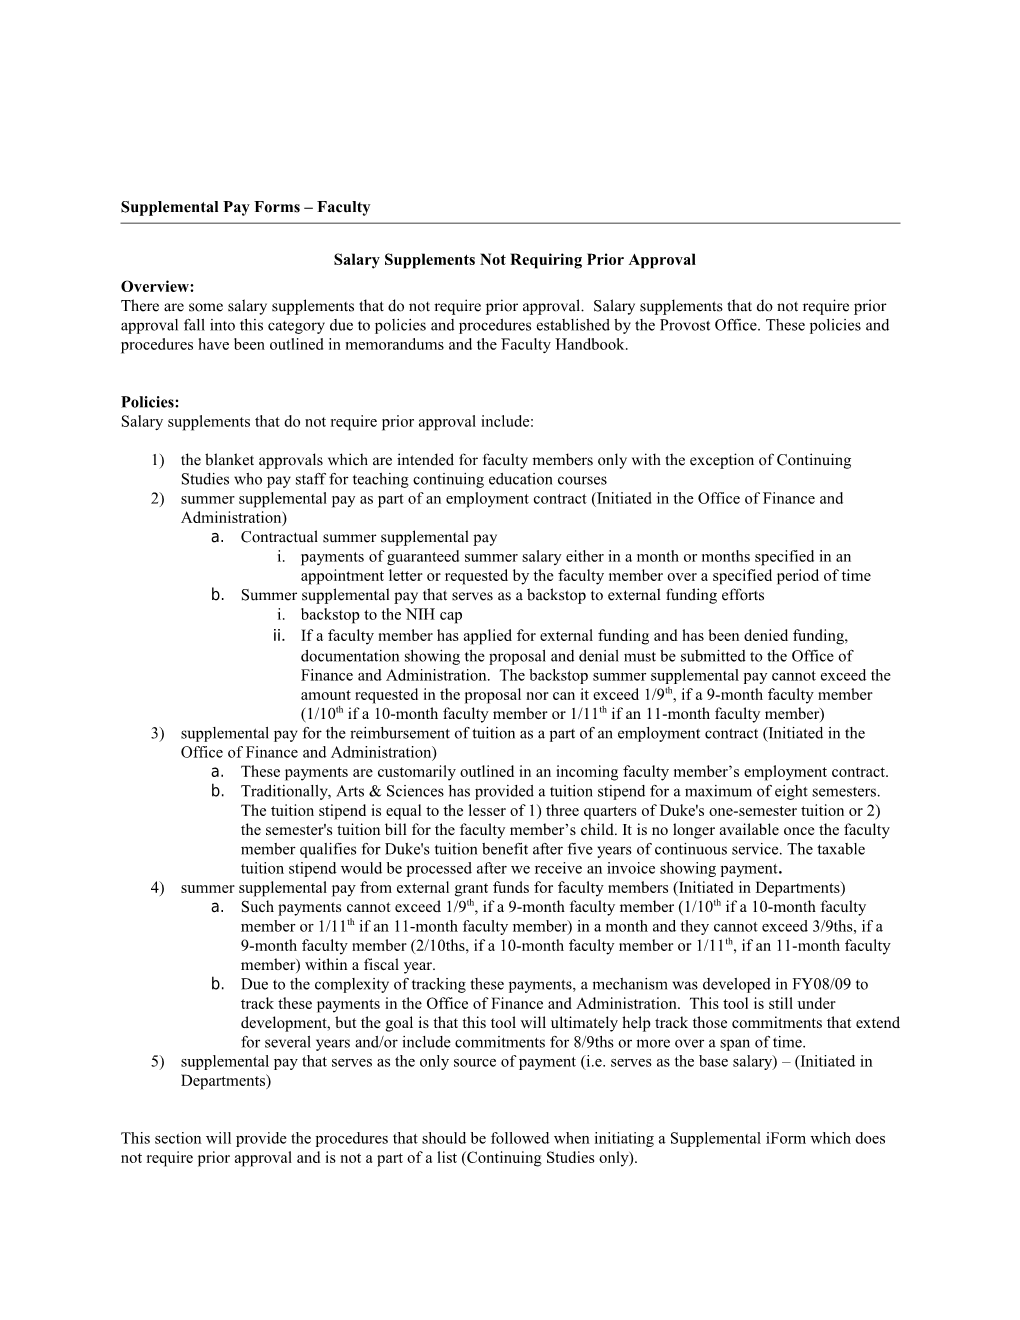 Supplemental Pay Forms Faculty